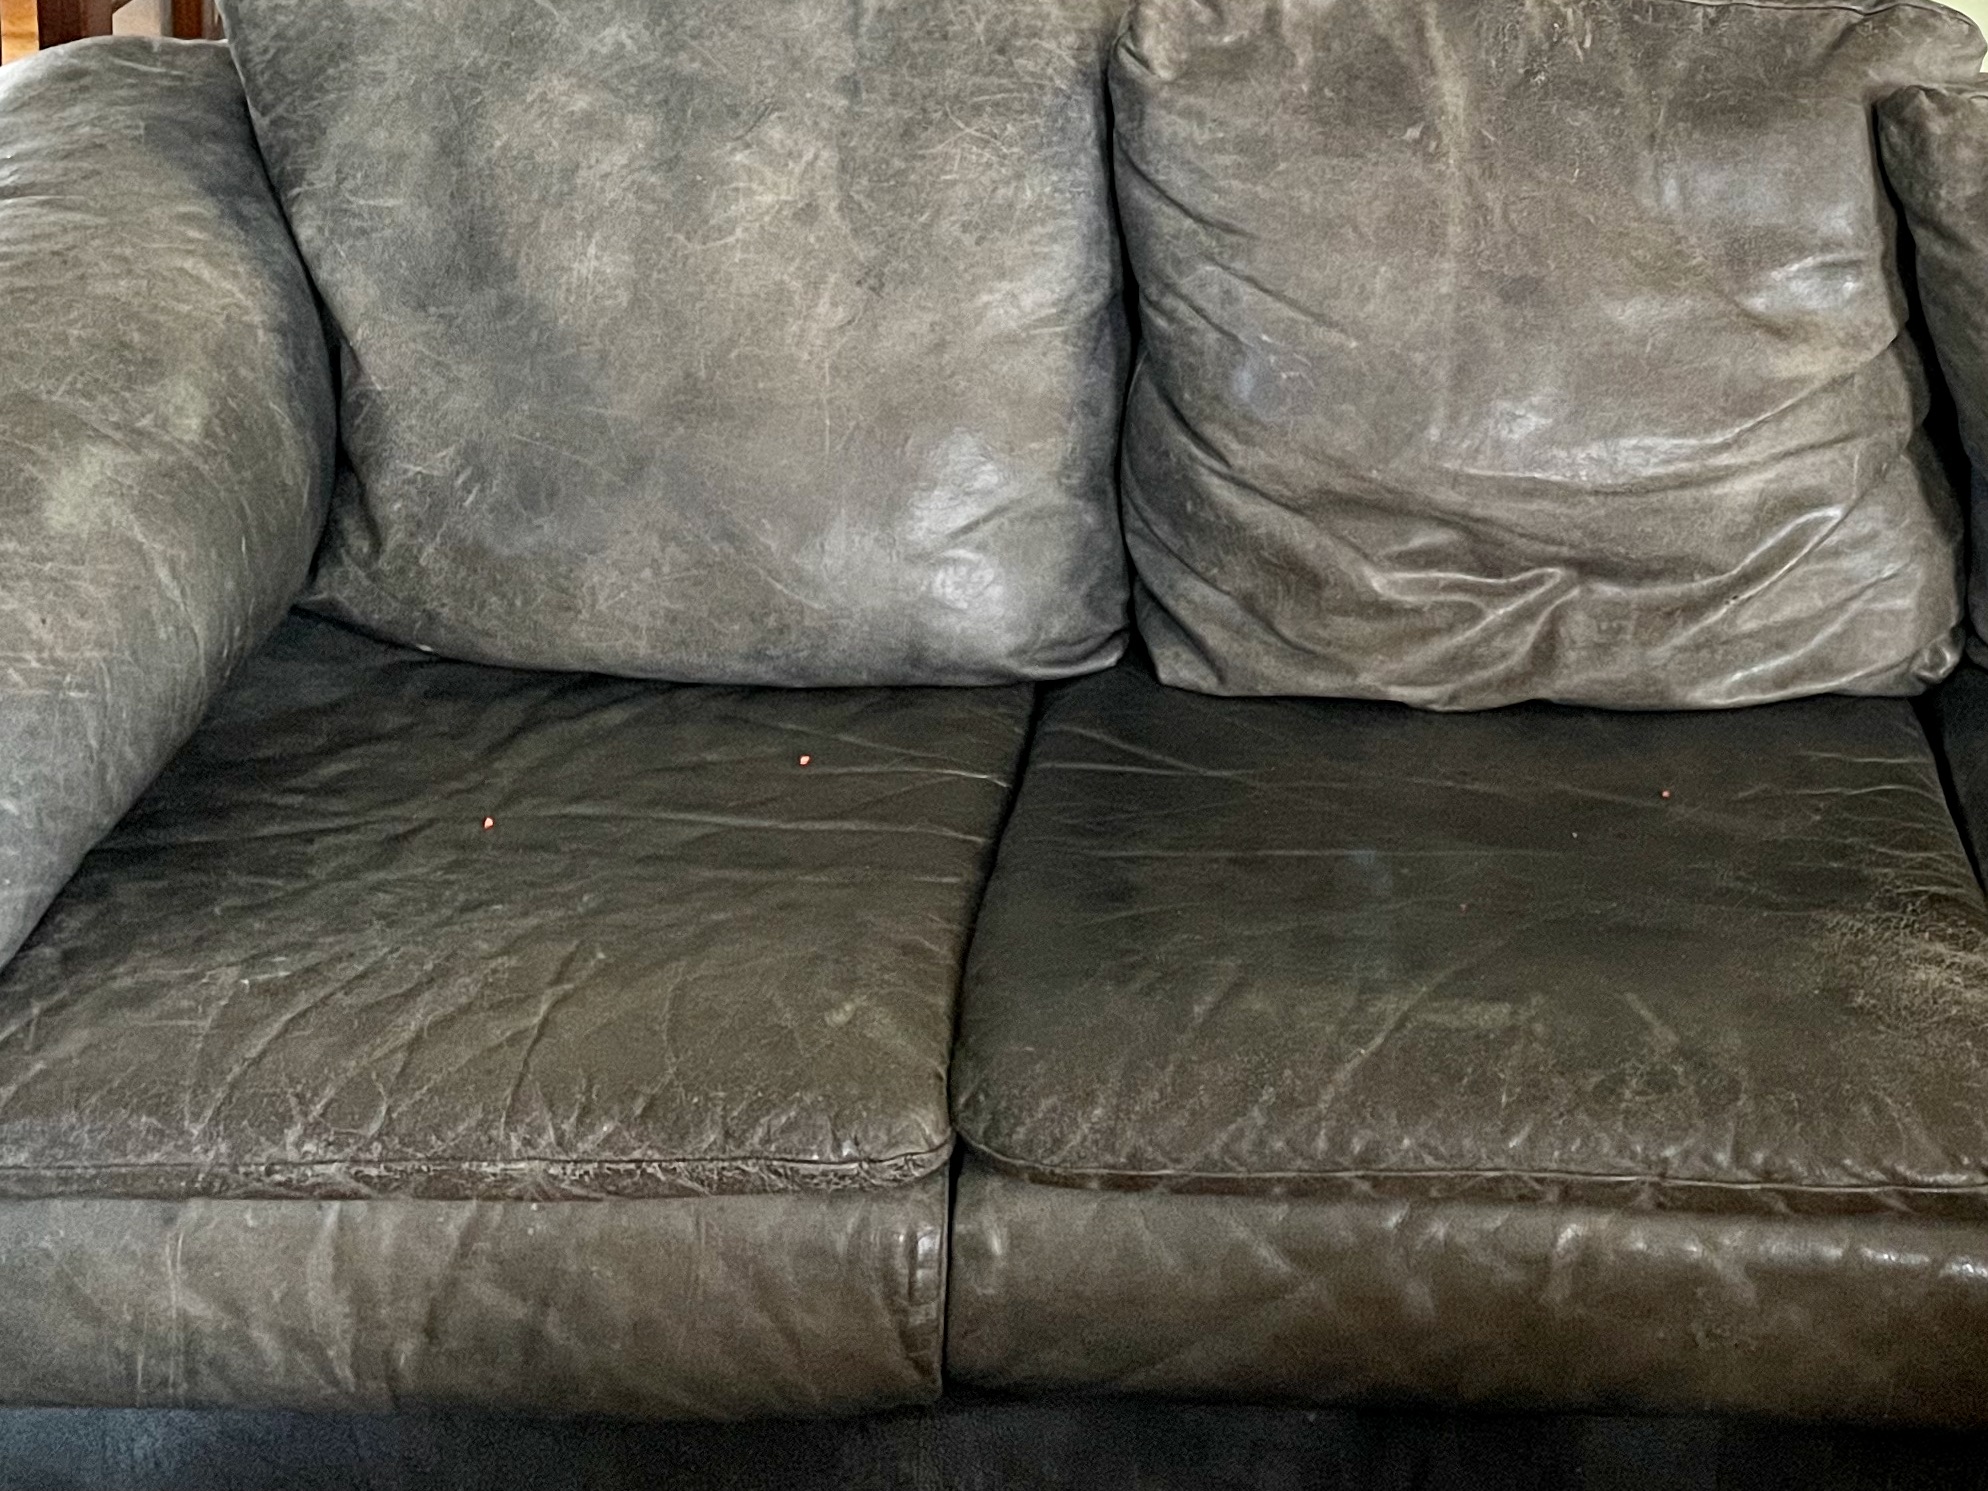 How to Clean Leather Furniture [Steps and Supplies Needed]